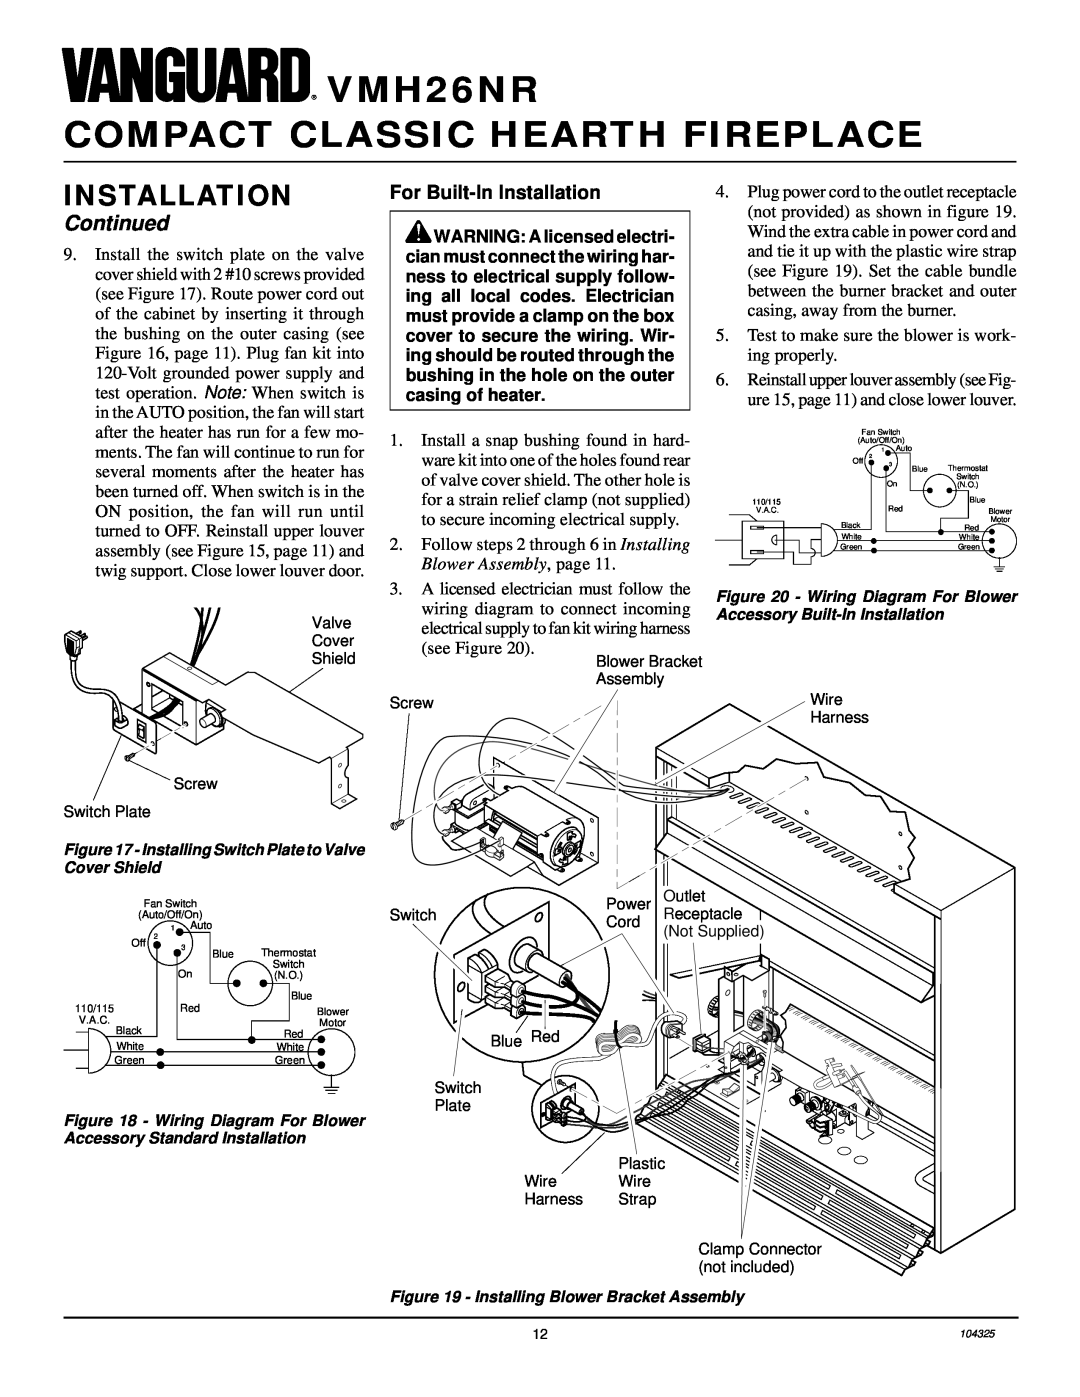 Vanguard Heating installation manual For Built-InInstallation, VMH26NR COMPACT CLASSIC HEARTH FIREPLACE, Continued 